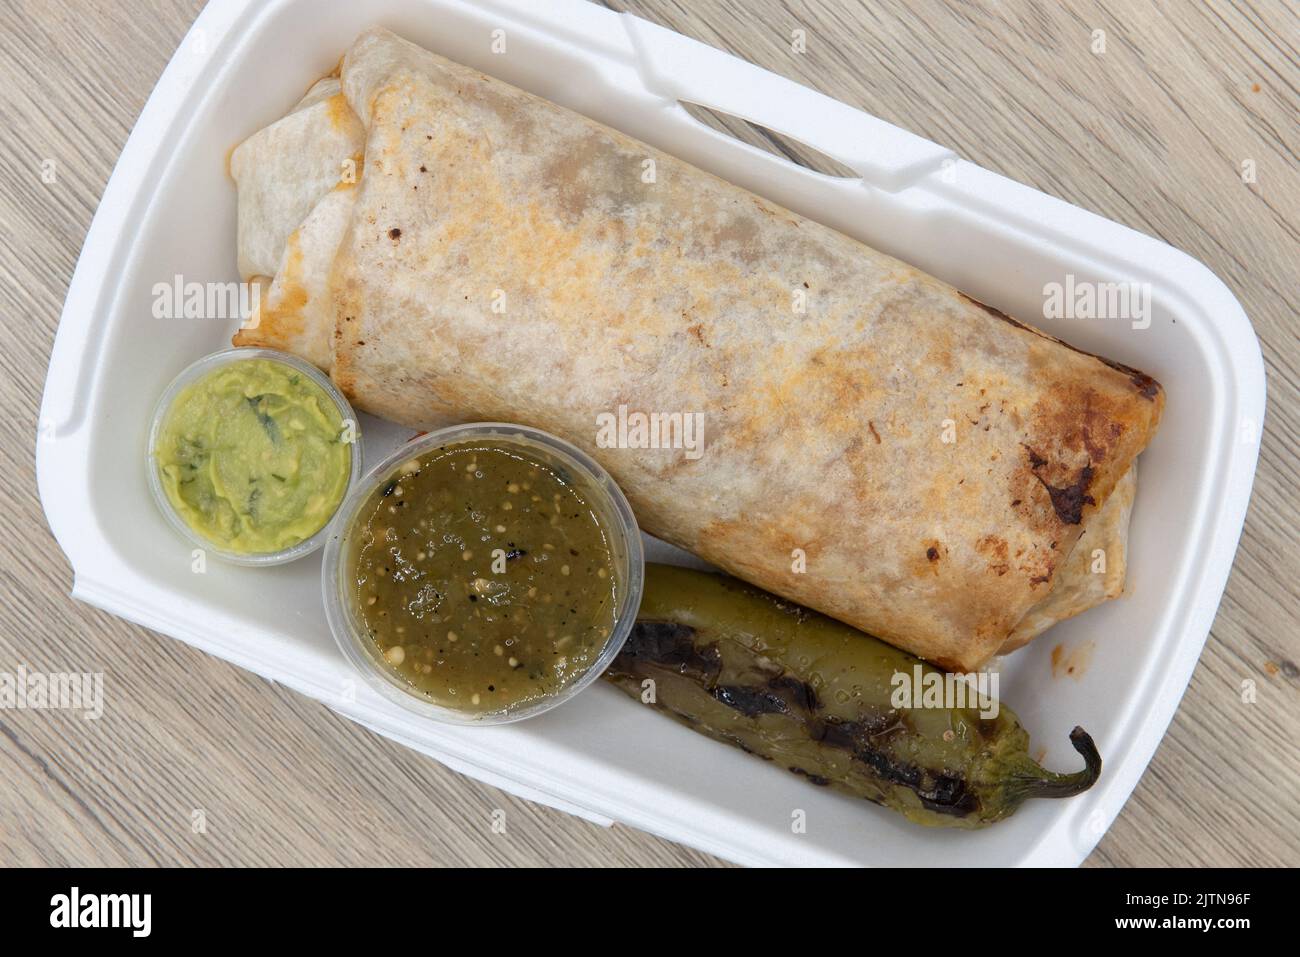 Overhead view of loaded mexican cuisine burrito, bulging at the flour tortilla and served with a grilled jalapeno, salsa, and guacamole. Stock Photo